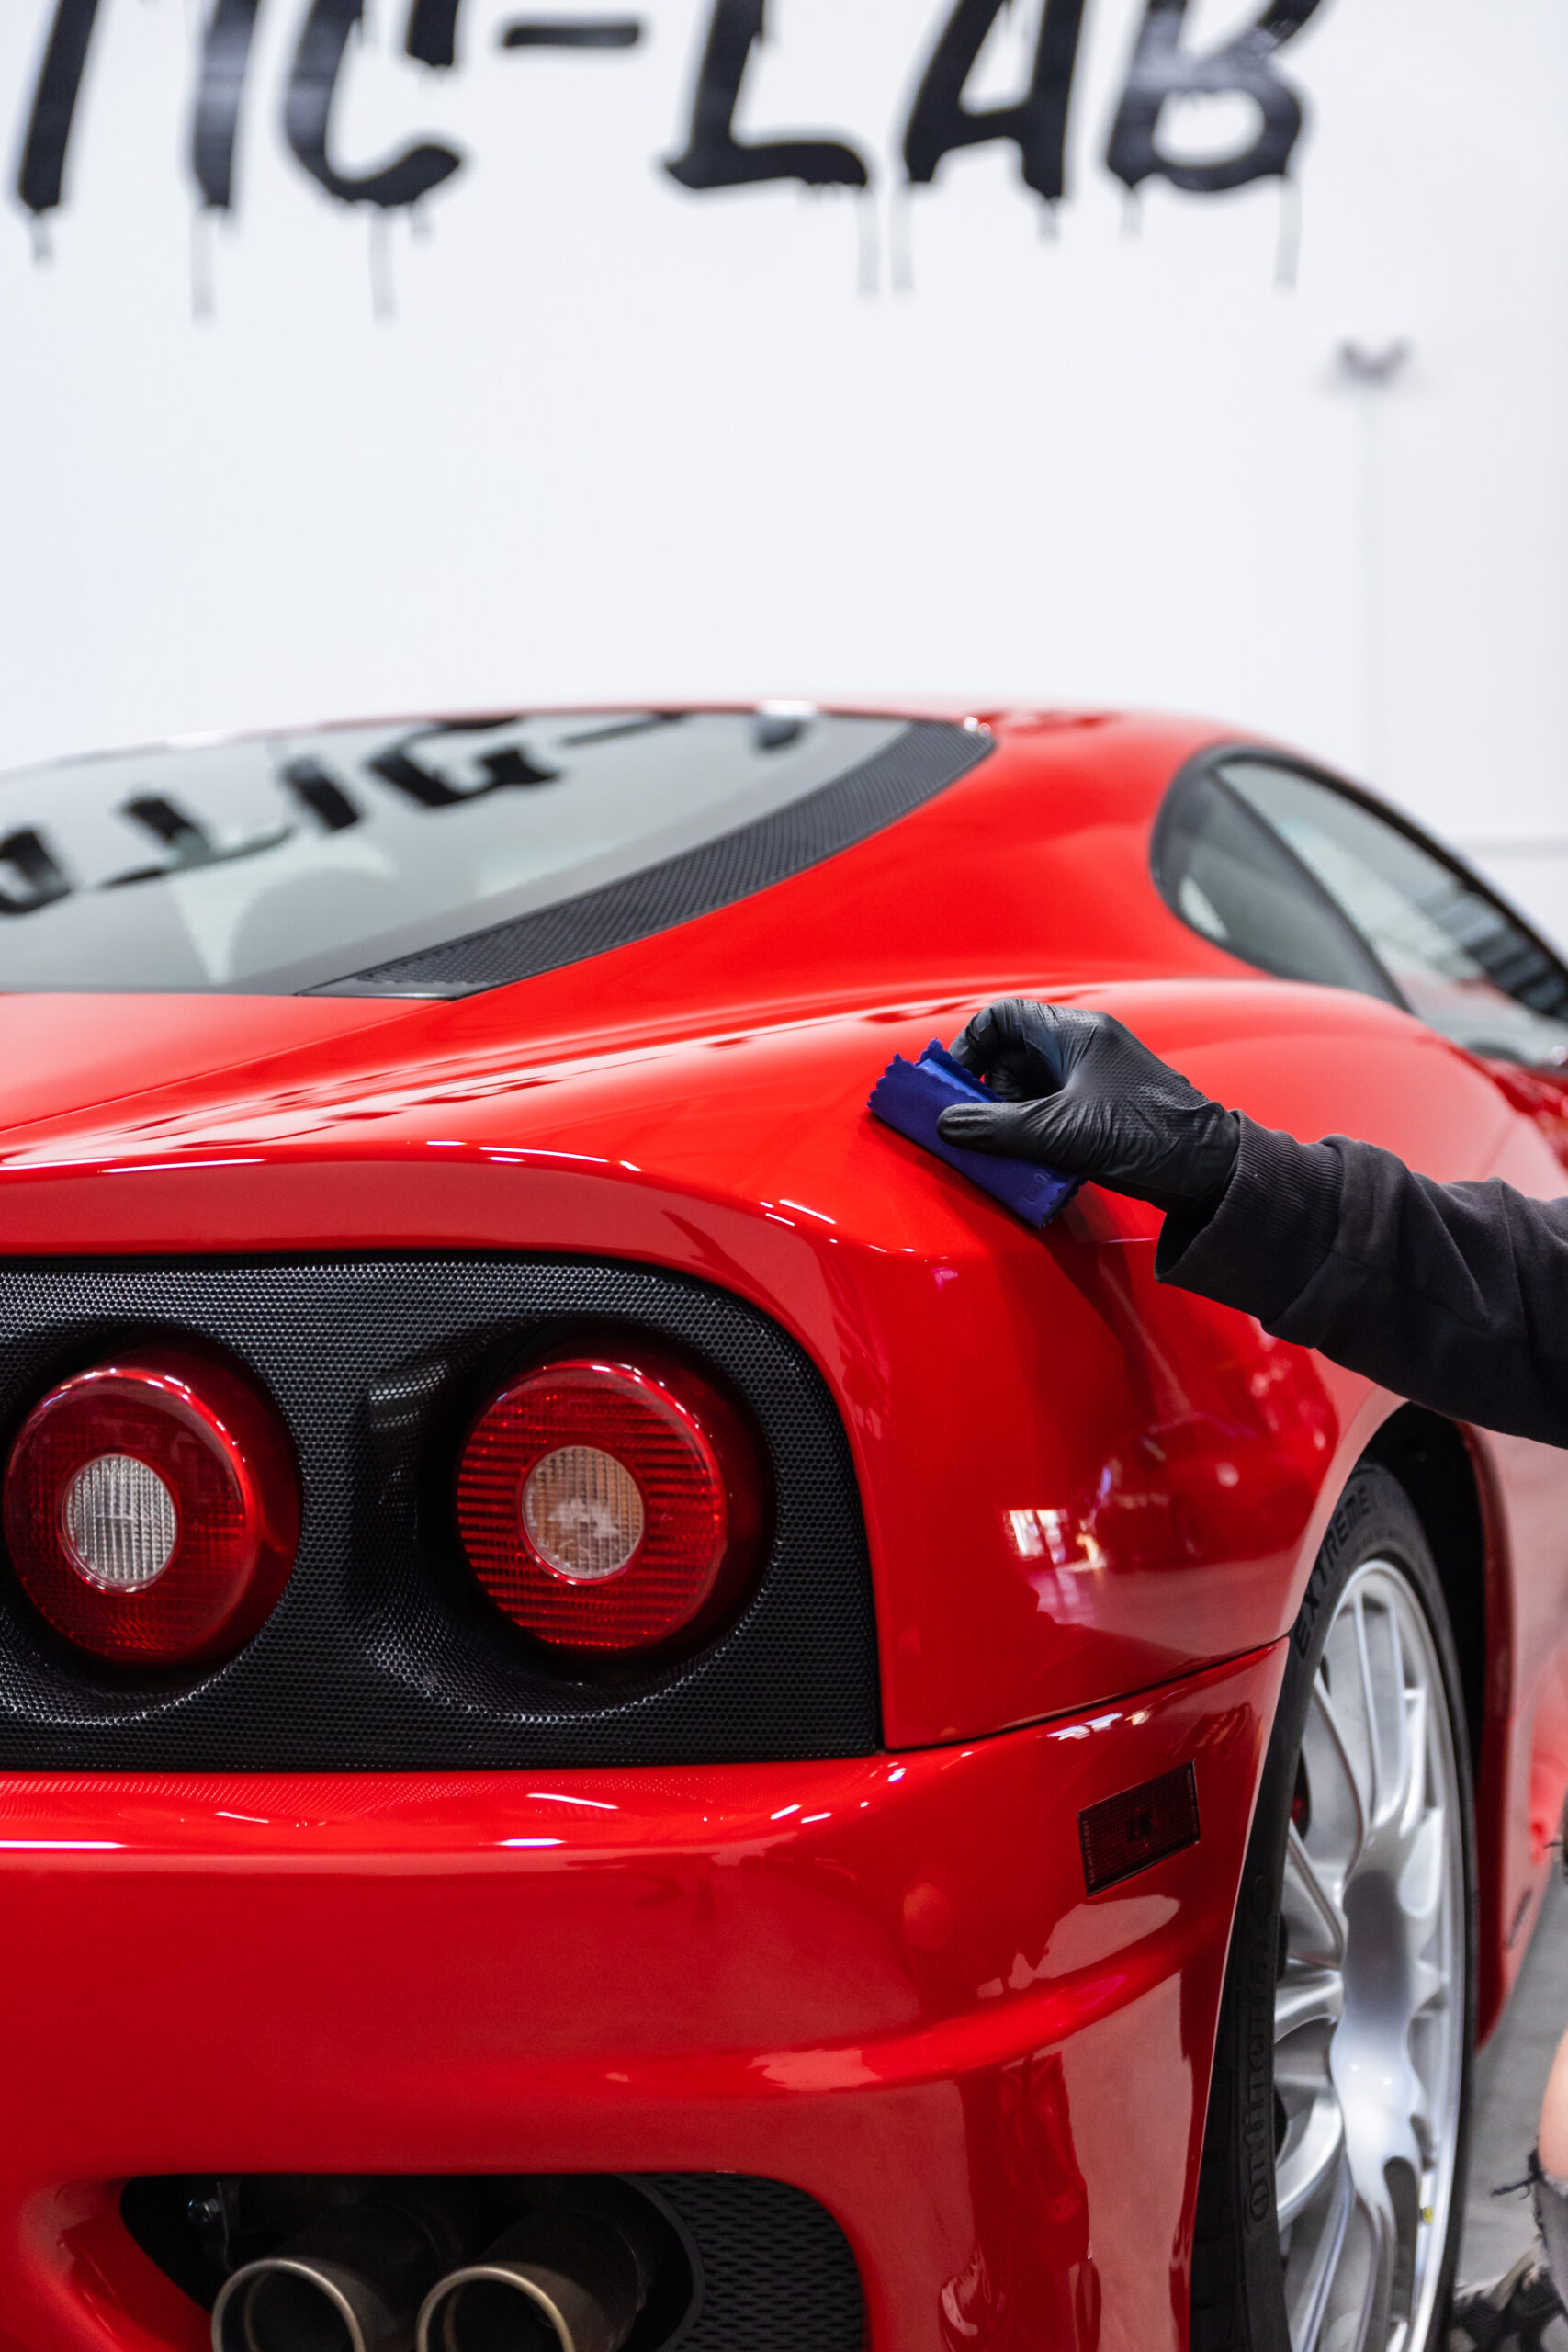 5 Best Professional Ceramic Coating Brands For Cars - Sleek Auto Paint